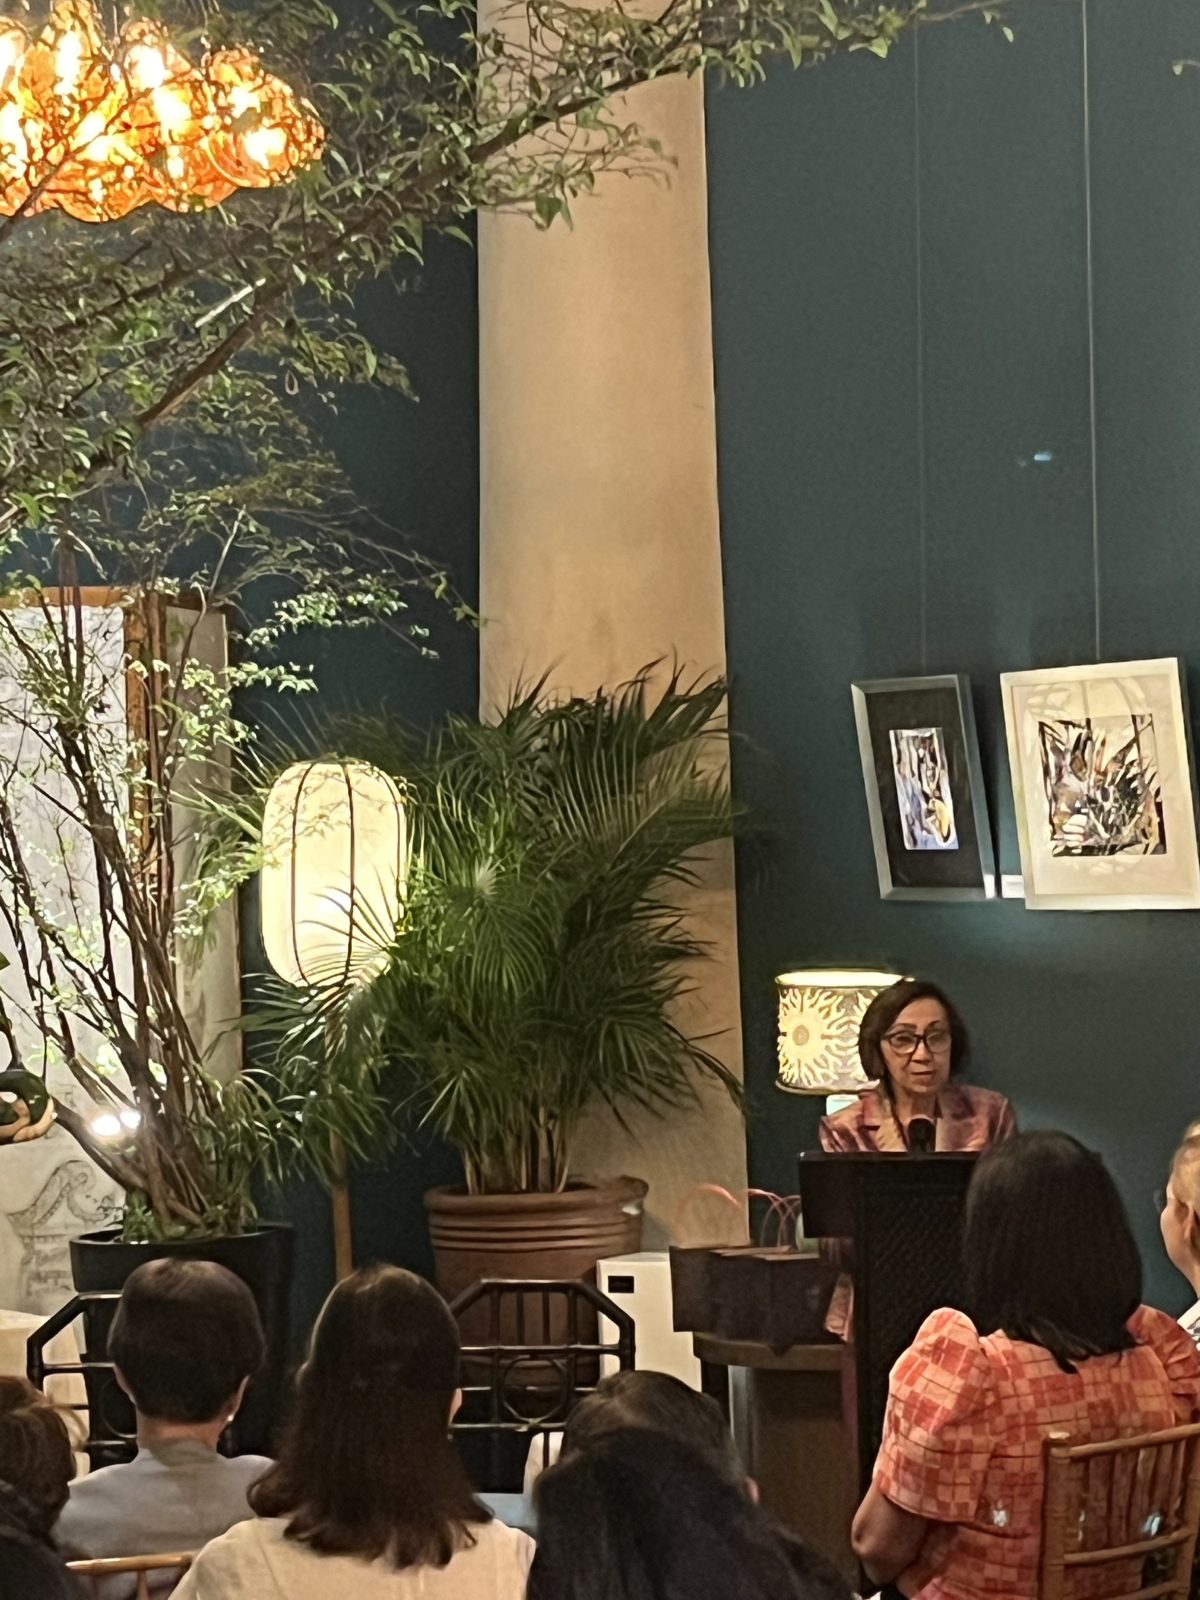 Ambassador Delia Albert, the first woman career diplomat to become Secretary of Foreign Affairs in Asia, delivered the keynote speech for the program